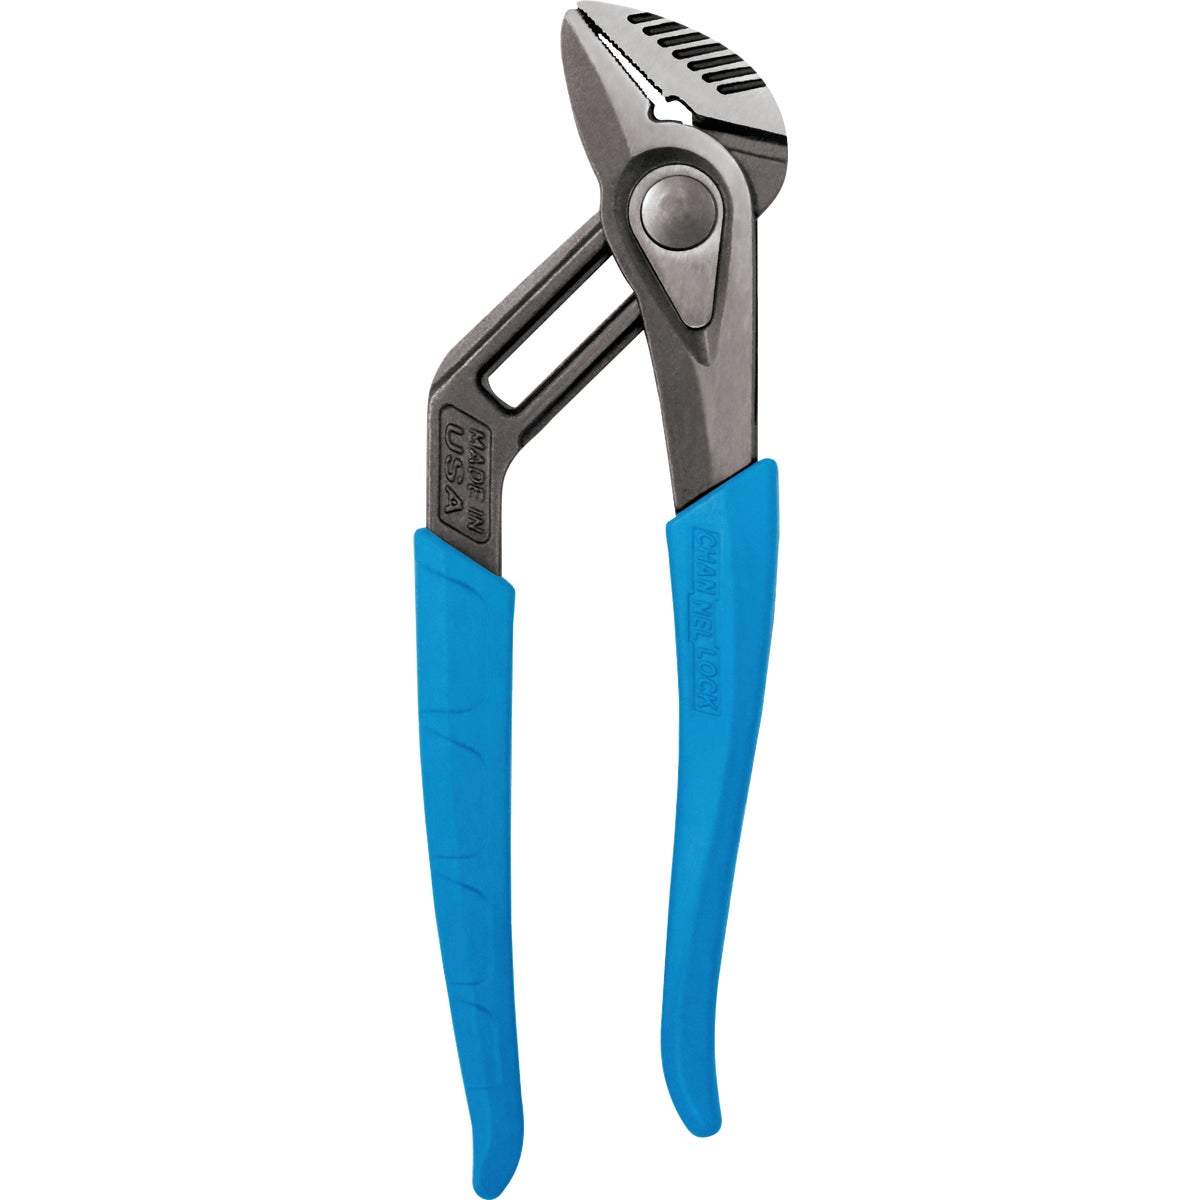 Item 370624, Channellock SpeedGrip Tongue &amp; Groove Pliers make fast and easy non-